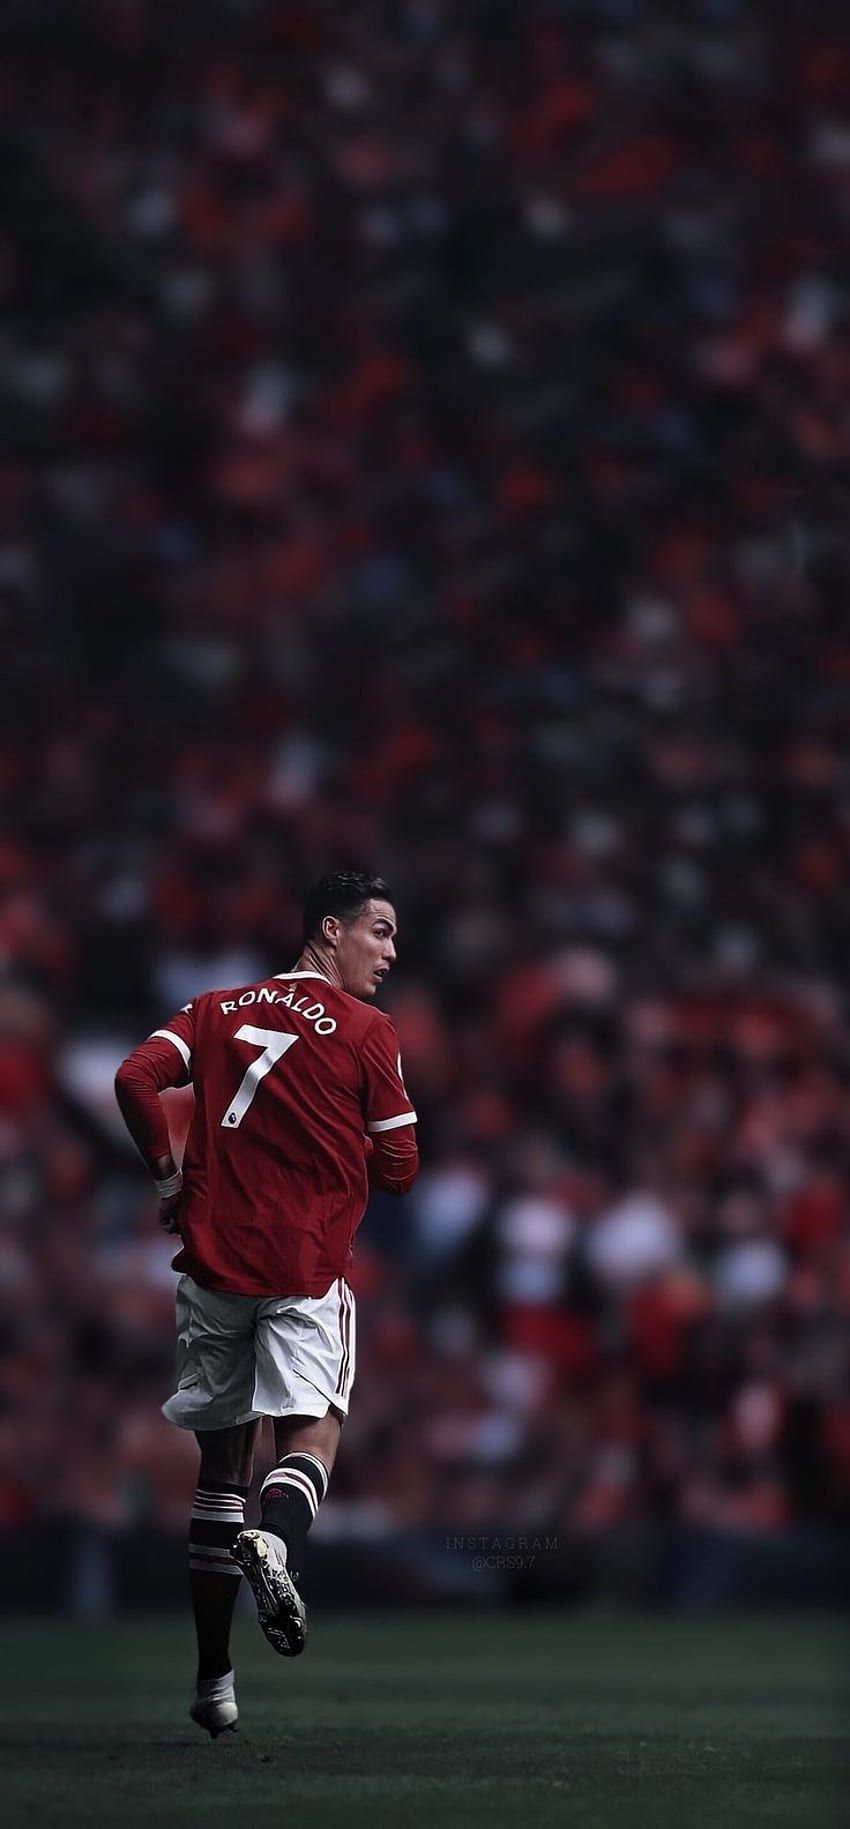 Cristiano Ronaldo Manchester United iPhone Wallpaper with resolution 1080X1920 pixel. You can make this wallpaper for your iPhone 5, 6, 7, 8, X backgrounds, Mobile Screensaver, or iPad Lock Screen - Cristiano Ronaldo